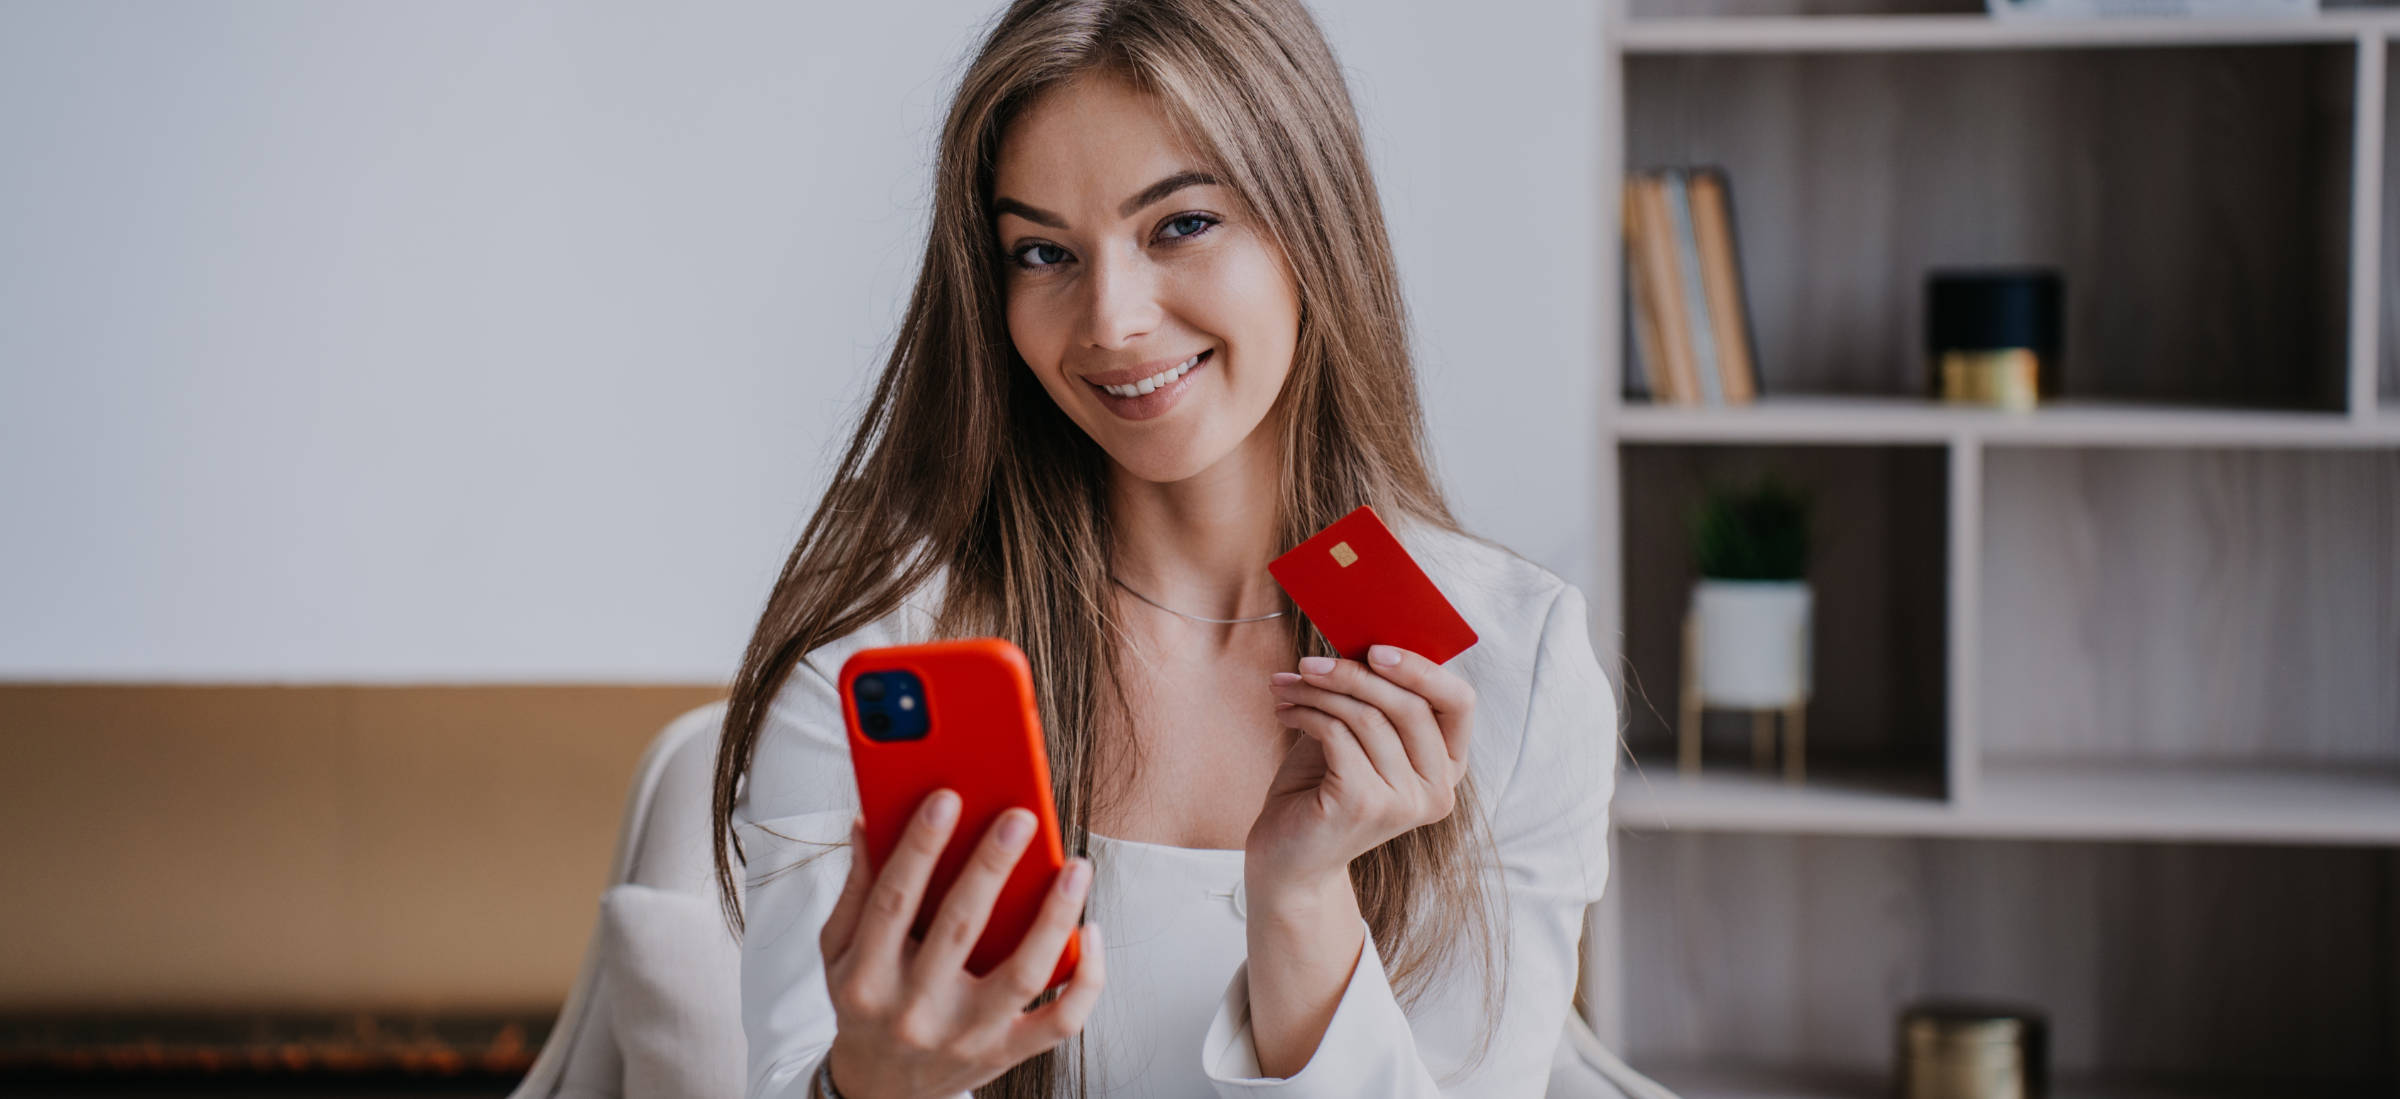 Contented beautiful blonde young woman in business suit, sitting in a comfortable chair in the office, talking by phone, showing off new bank card with salary. Excited entrepreneur gets money distant.